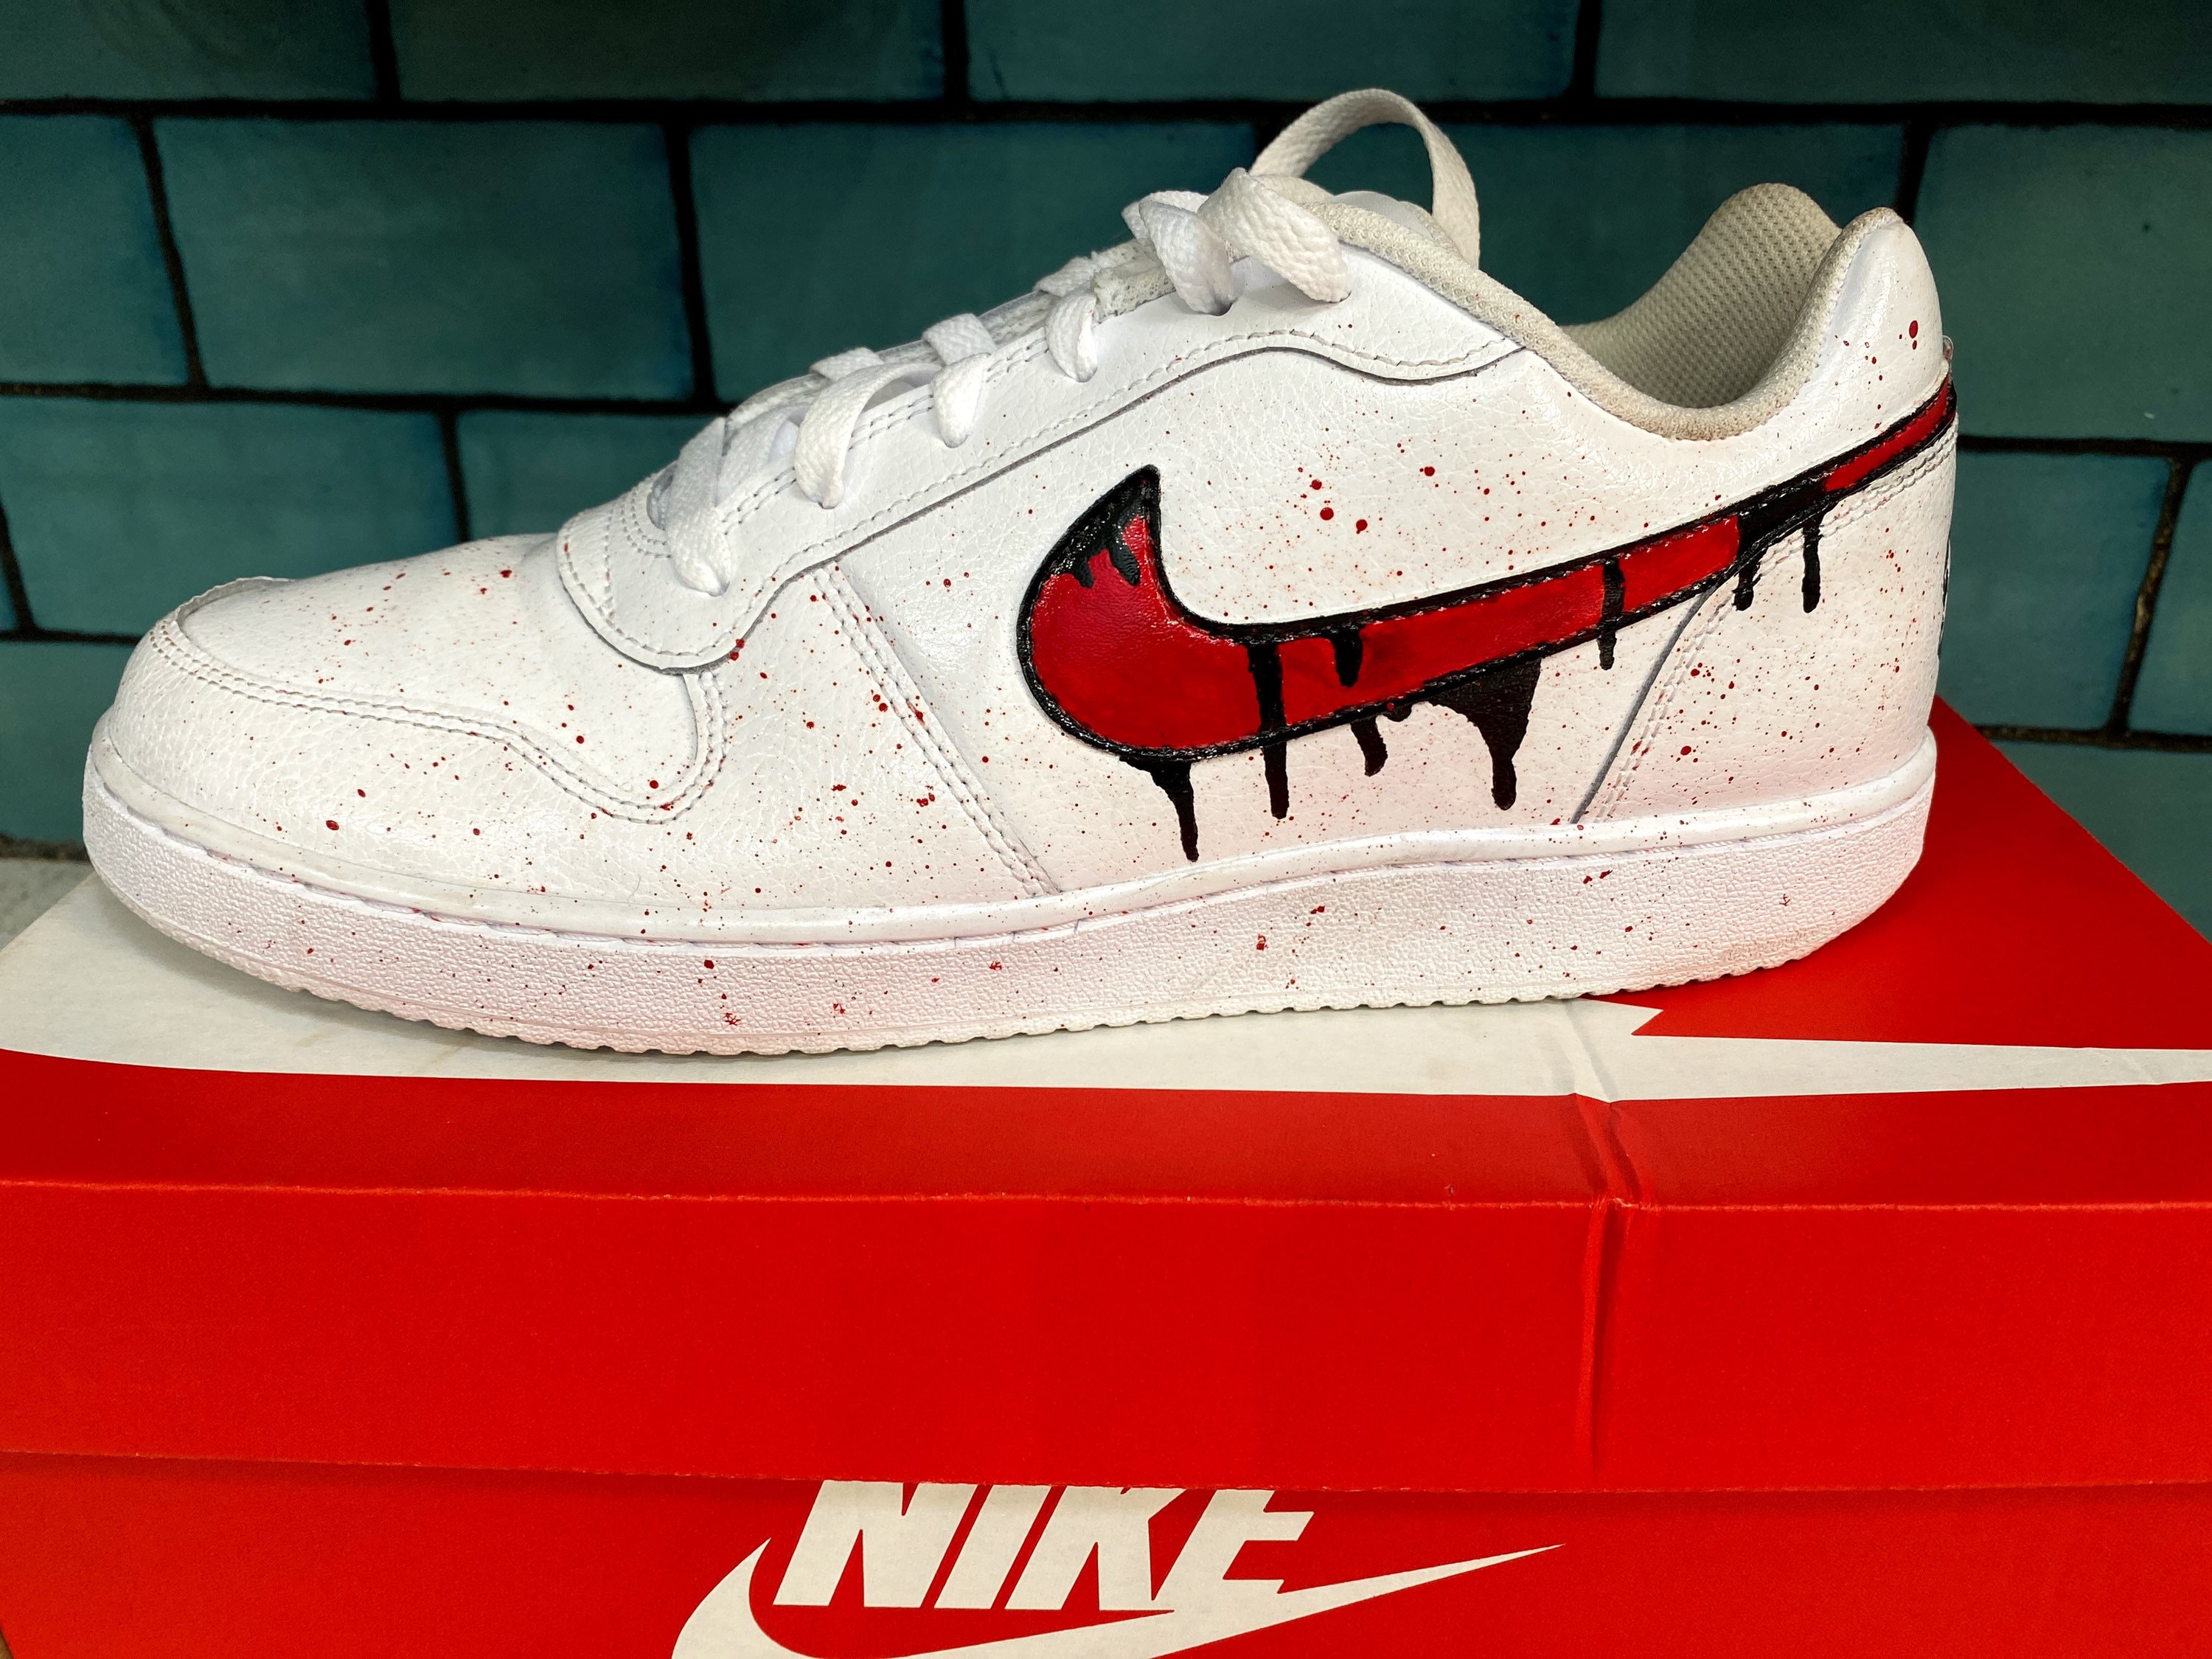 Nike Air Force 1 Low Red Black Paint Drip Custom NWT -  Finland